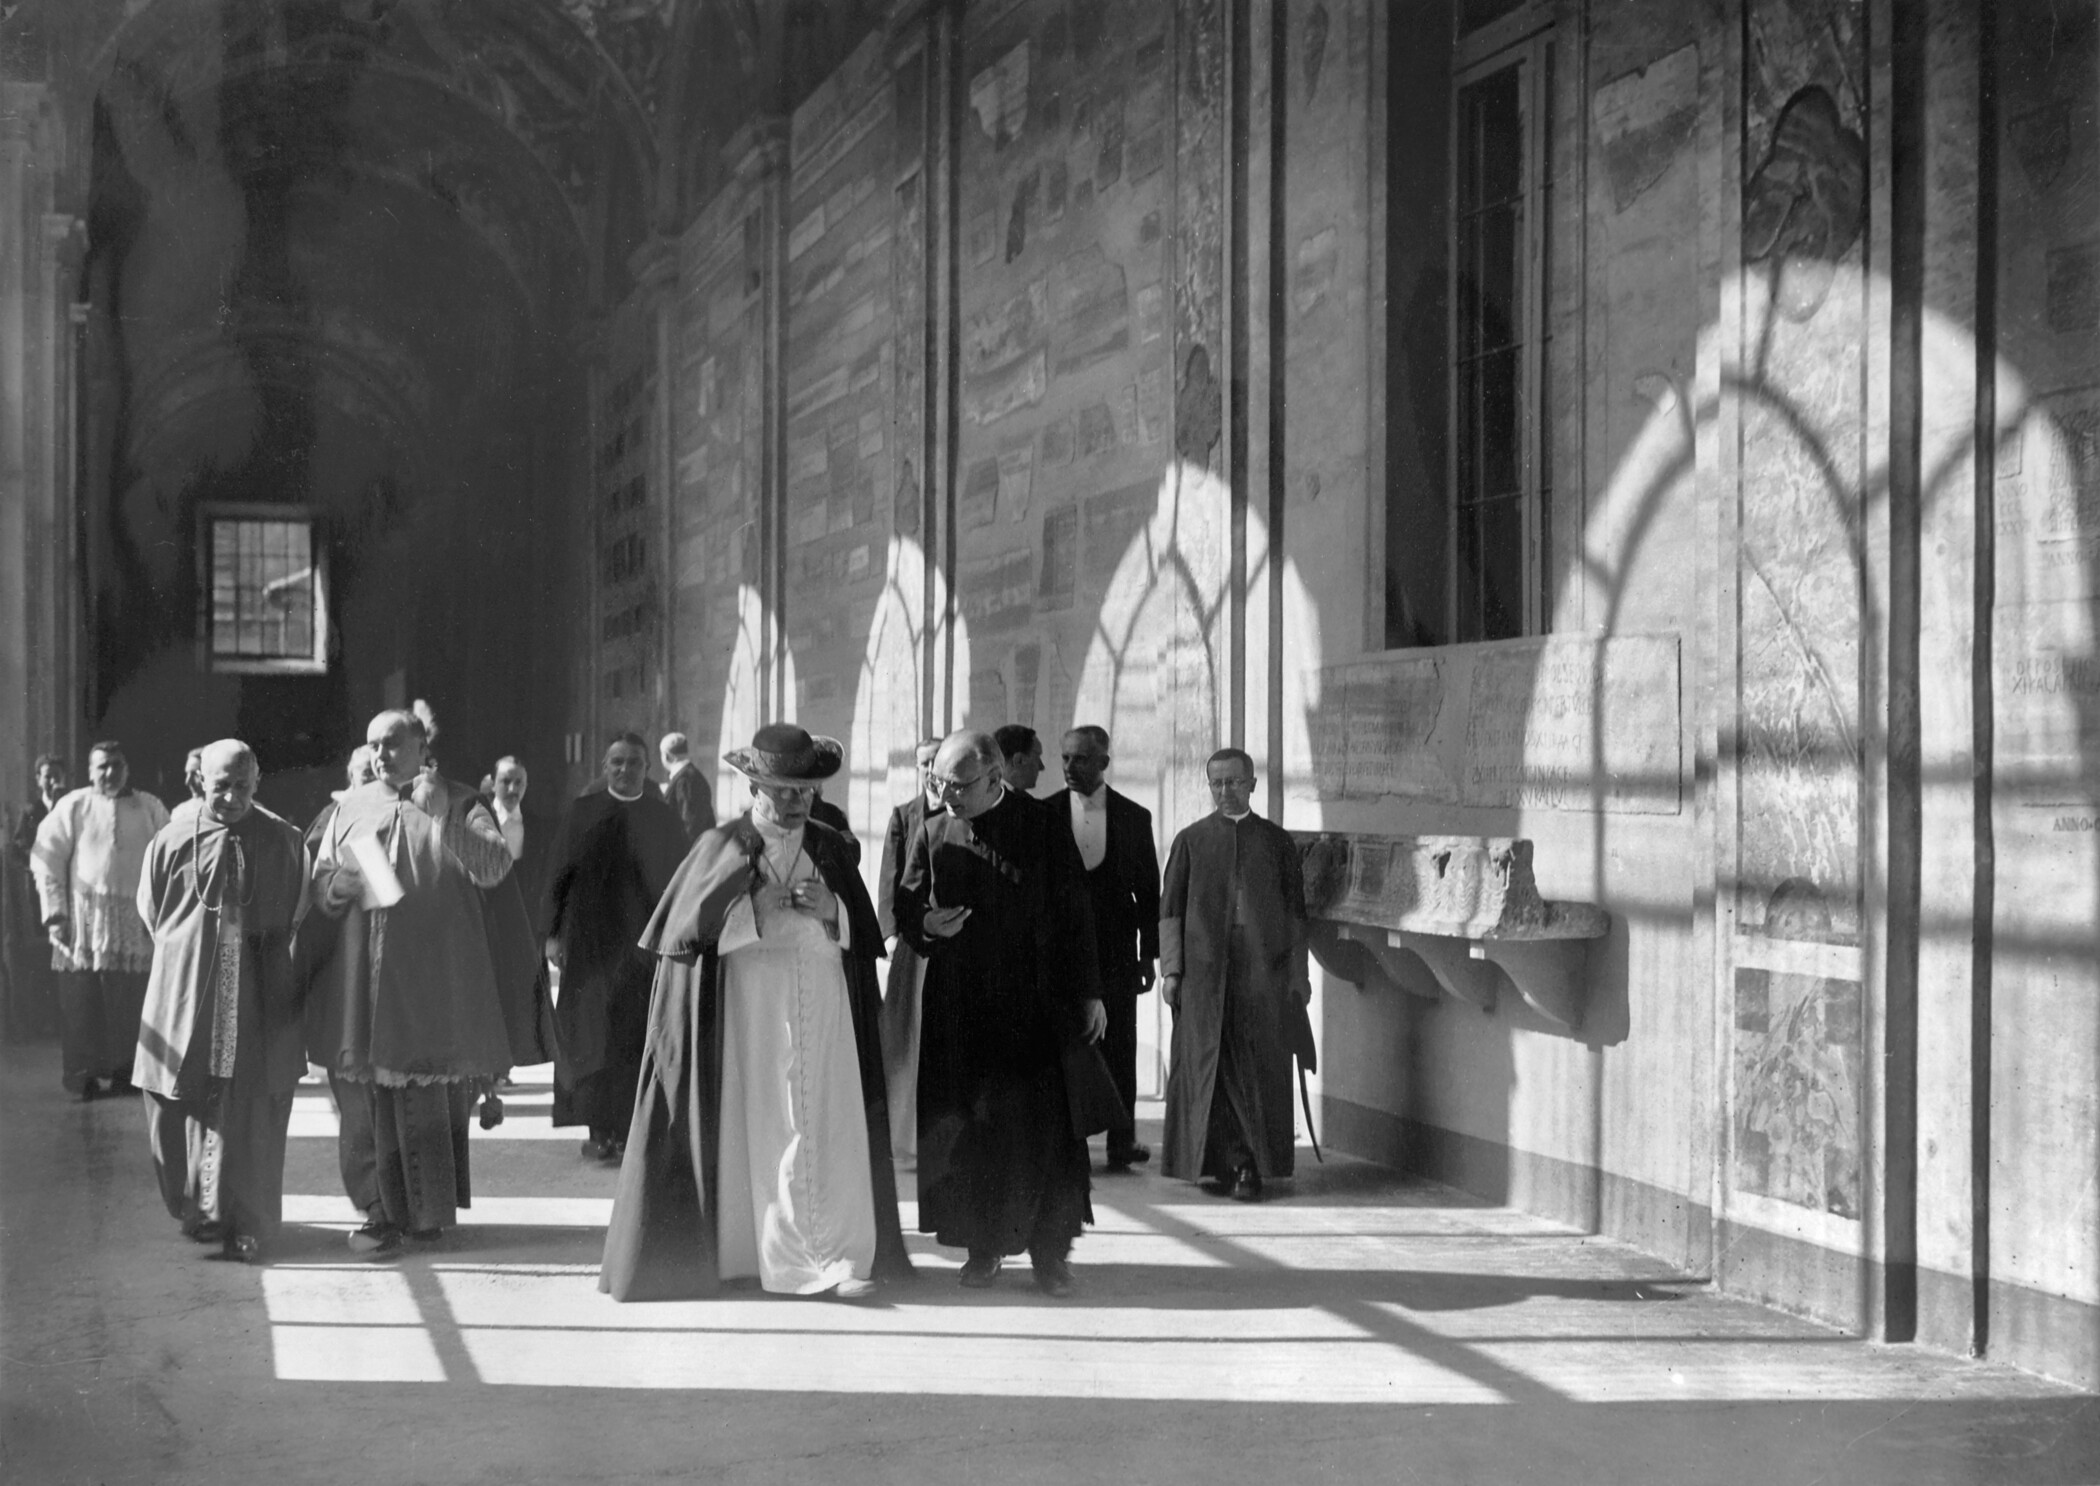 Father Wilhelm Schmidt with Pope Pius XI at the opening of the missionary ethnological museum in the Lateran, Rome, 20 December 1929; Photo Felici, Rome; SVD, Mission House St. Gabriel